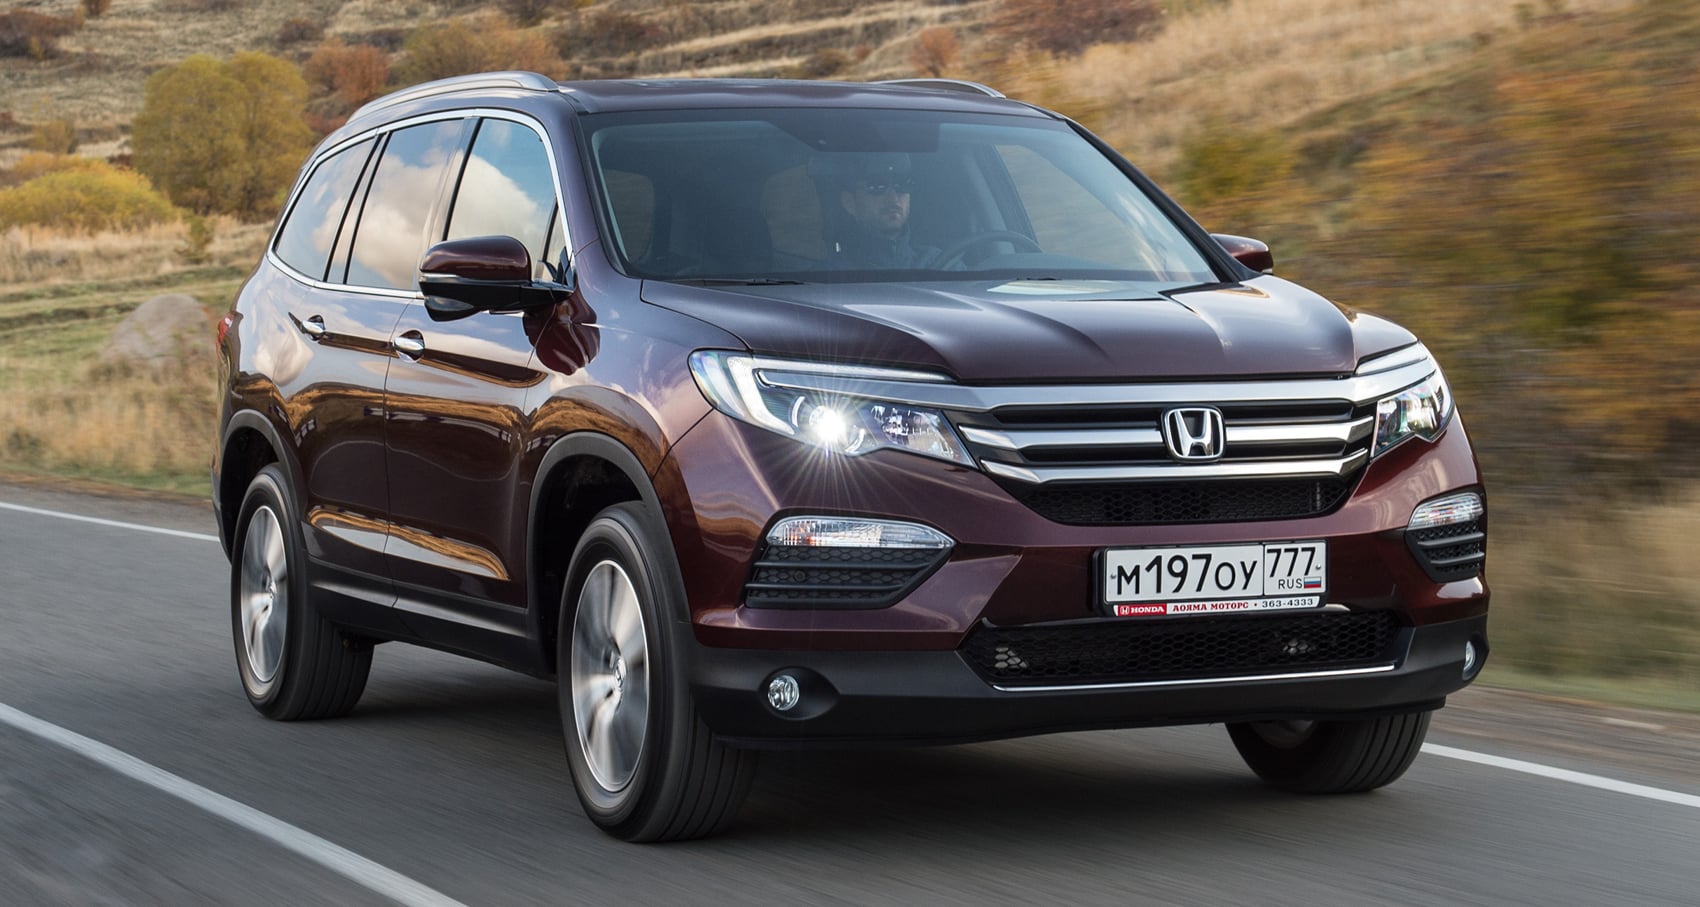 Honda's car division says goodbye to Russia: They sell almost nothing